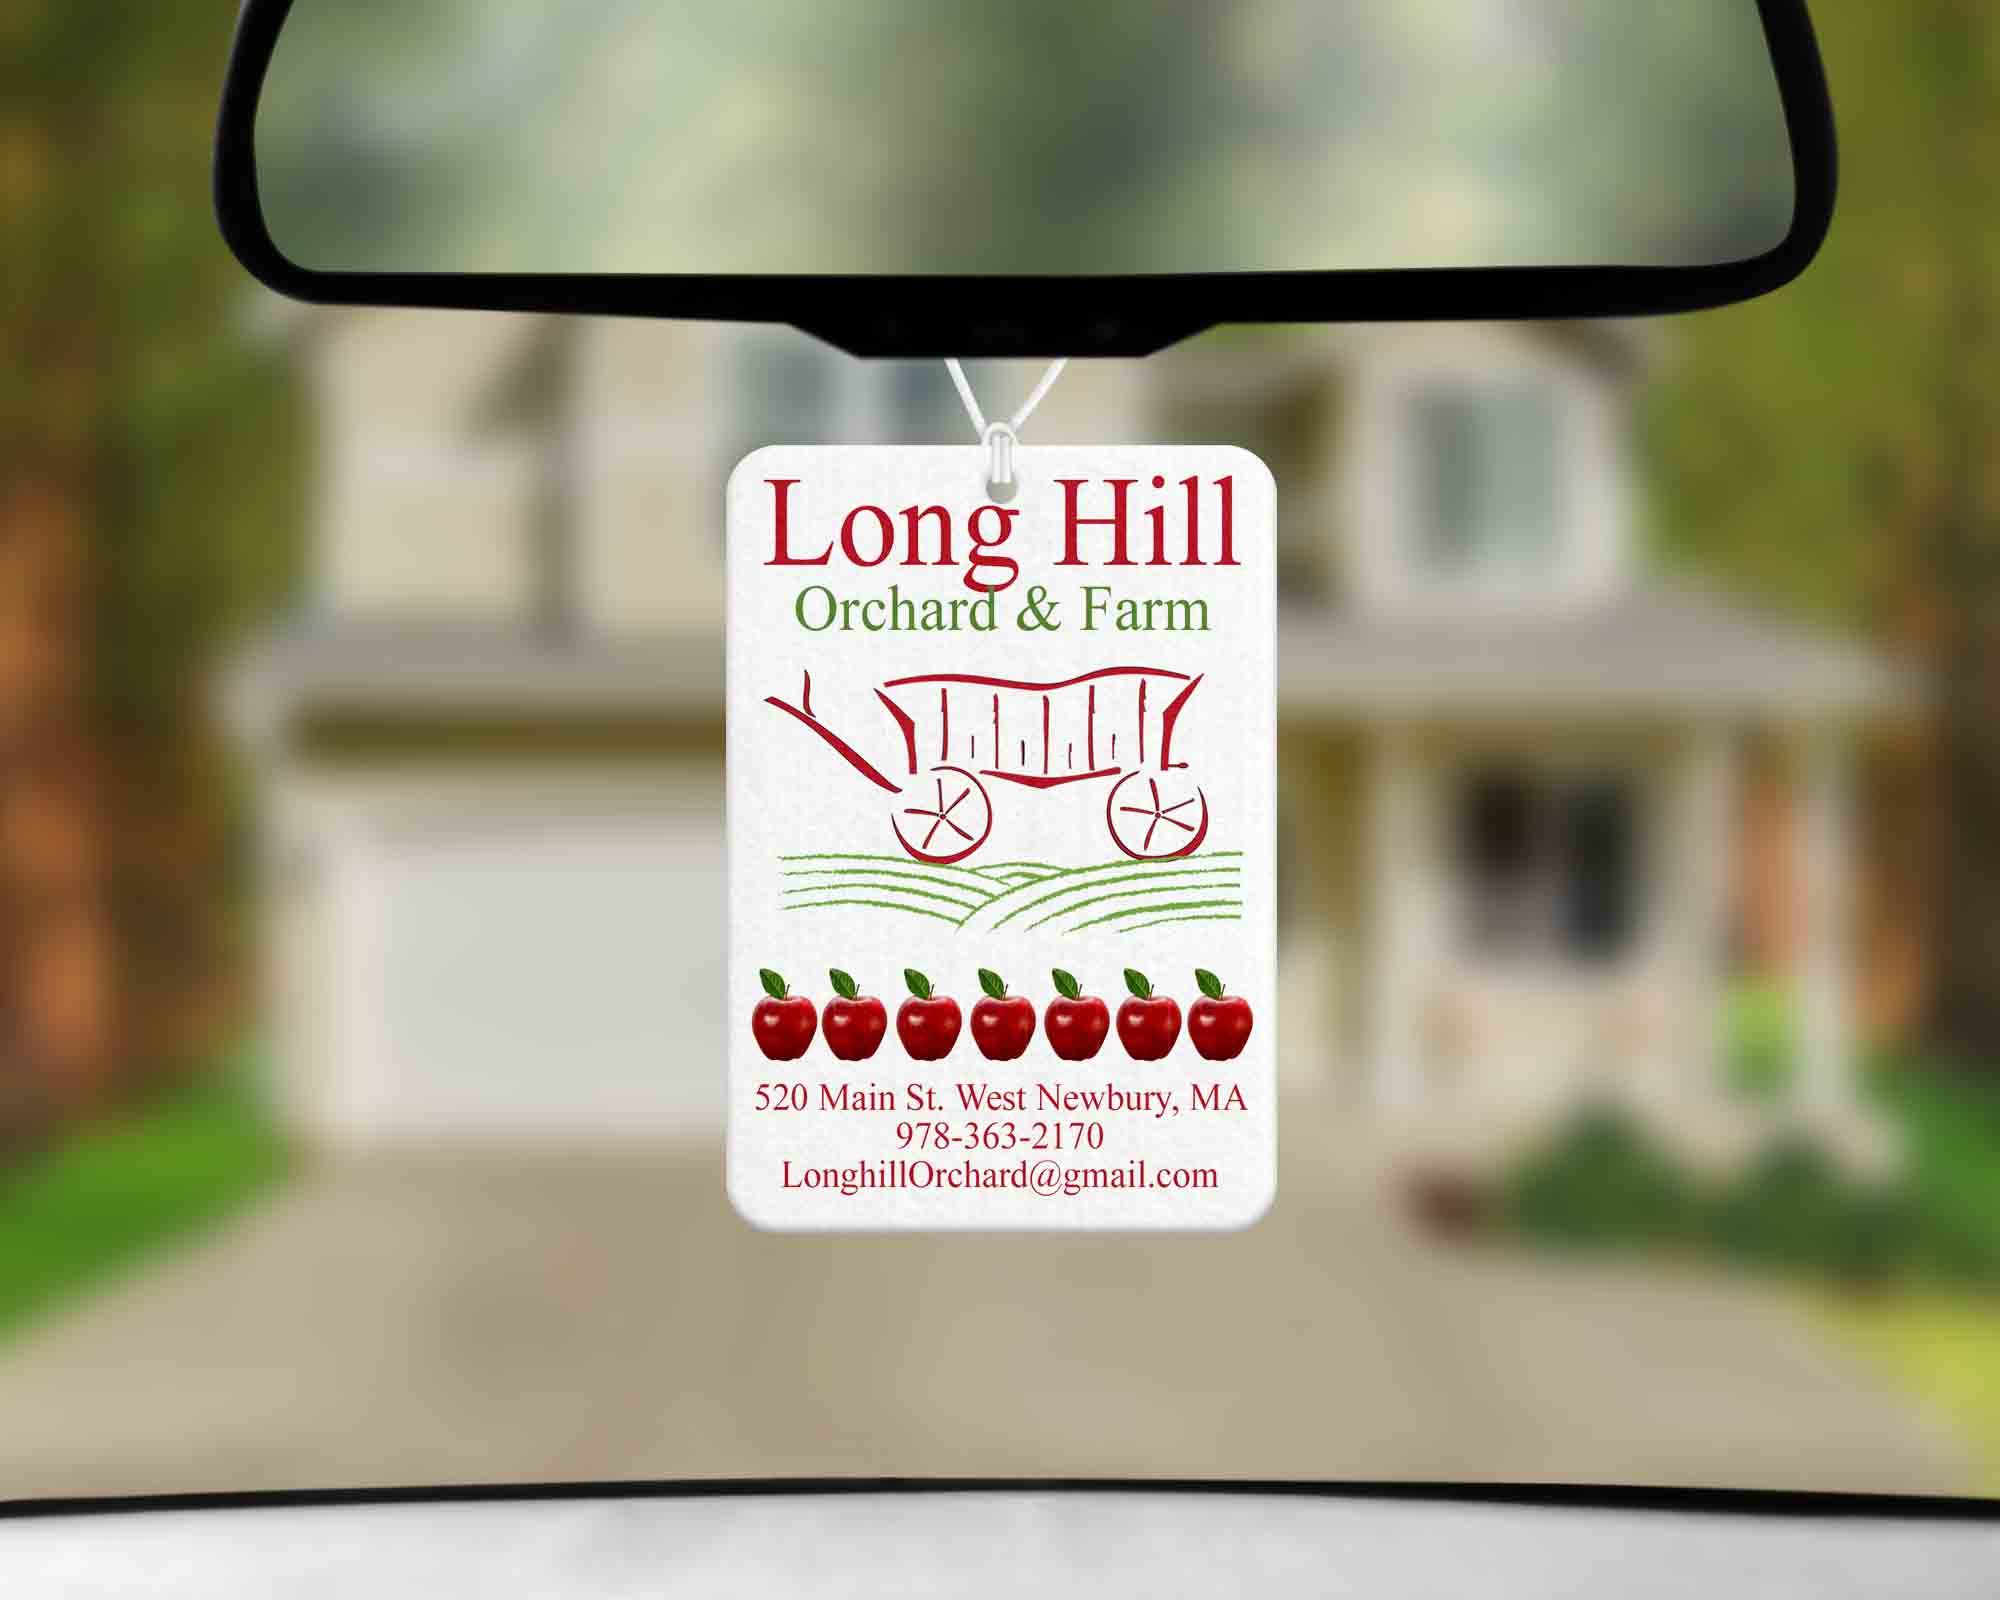 Long Hill Orchards made with sublimation printing